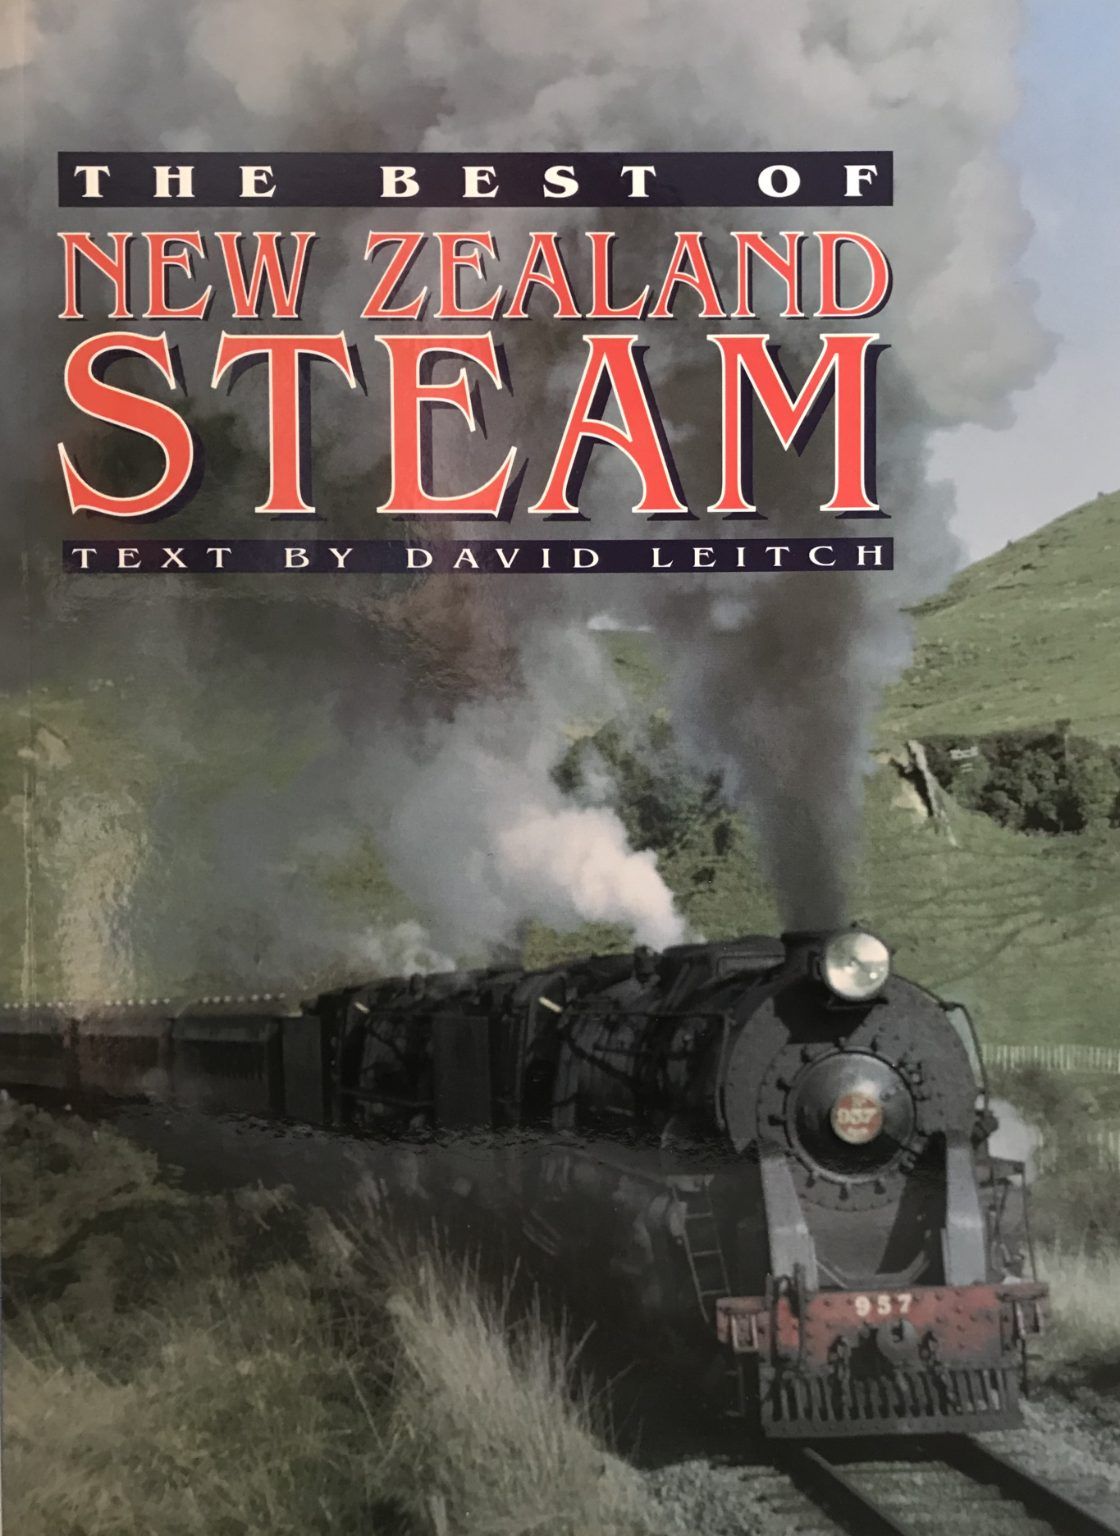 THE BEST OF NEW ZEALAND STEAM